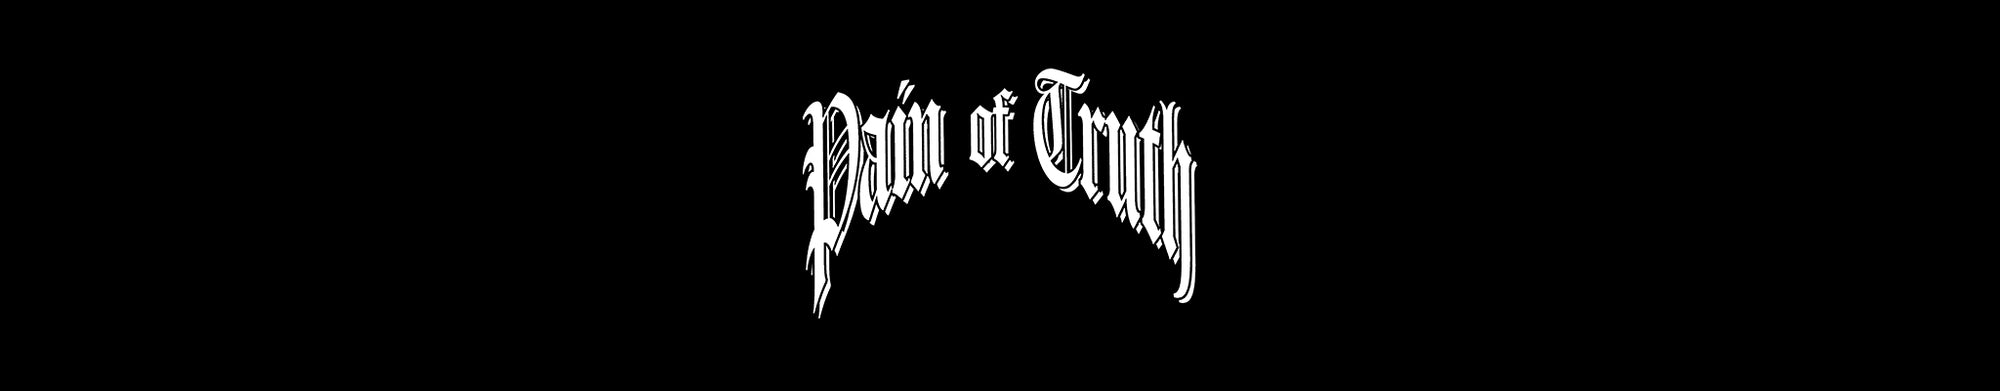 PAIN OF TRUTH